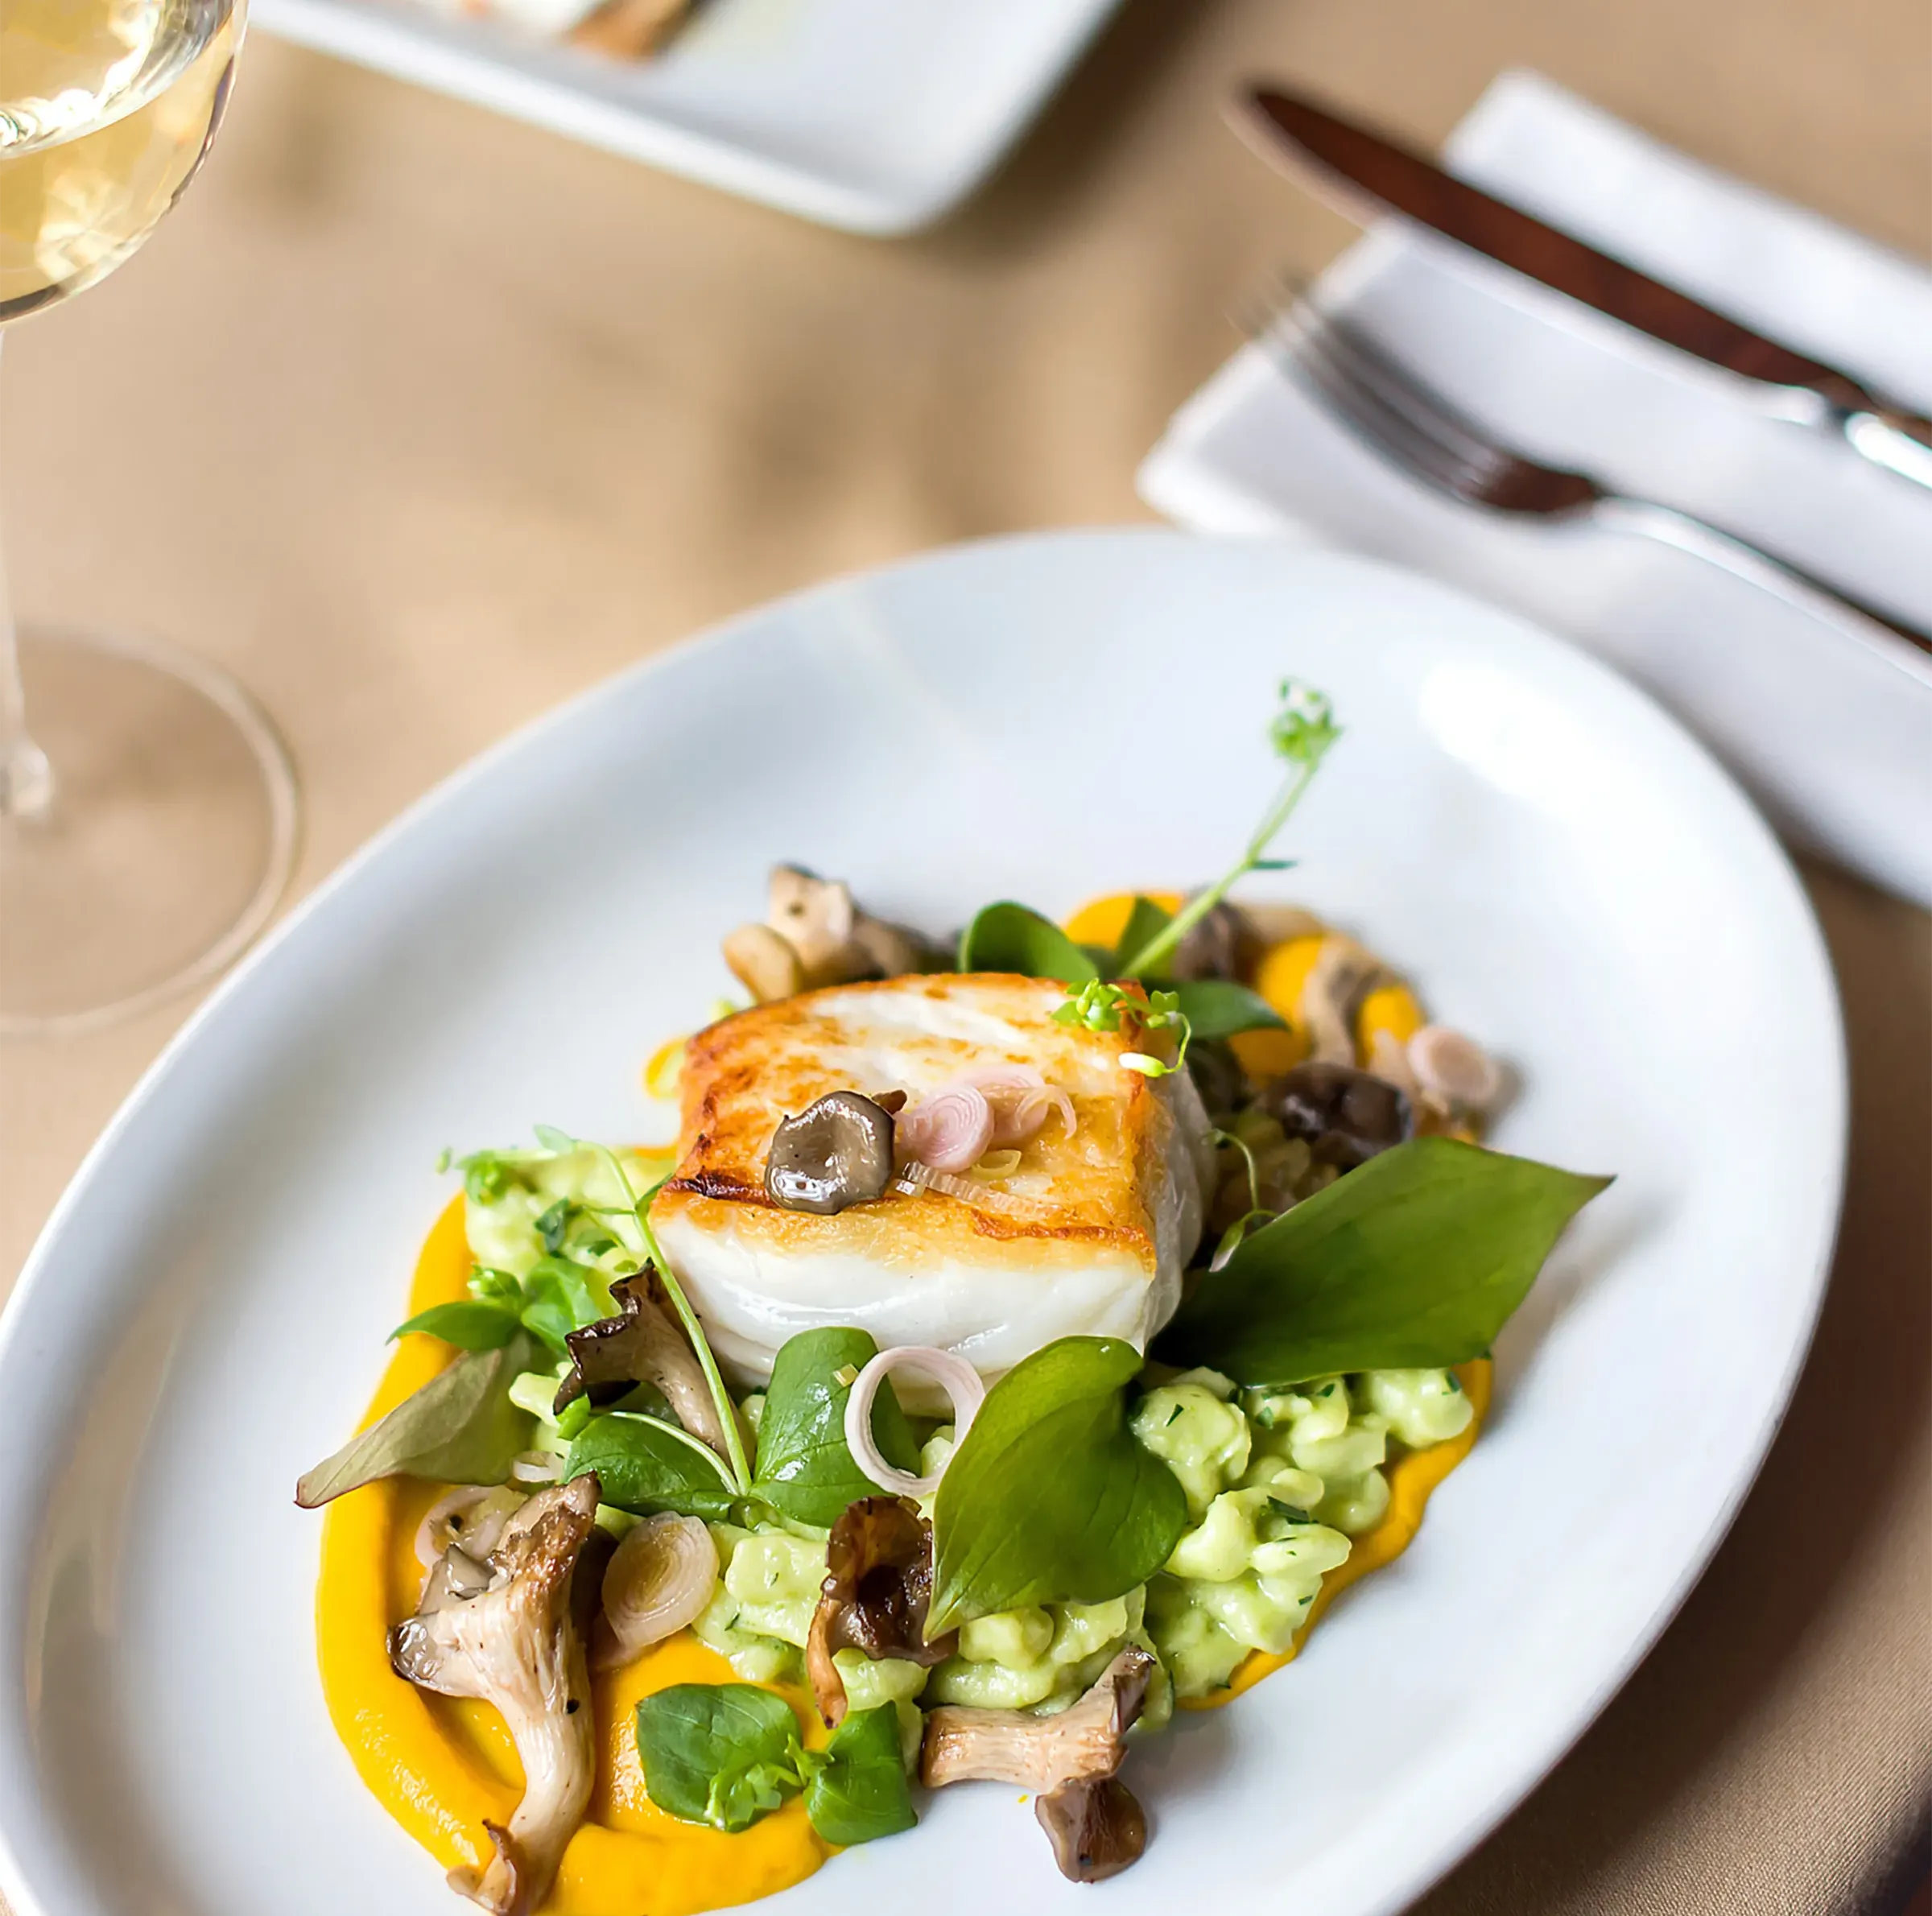 Fresh fish on top of risotto with vegetables expertly crafted by a dedicated chef at The Reserve.